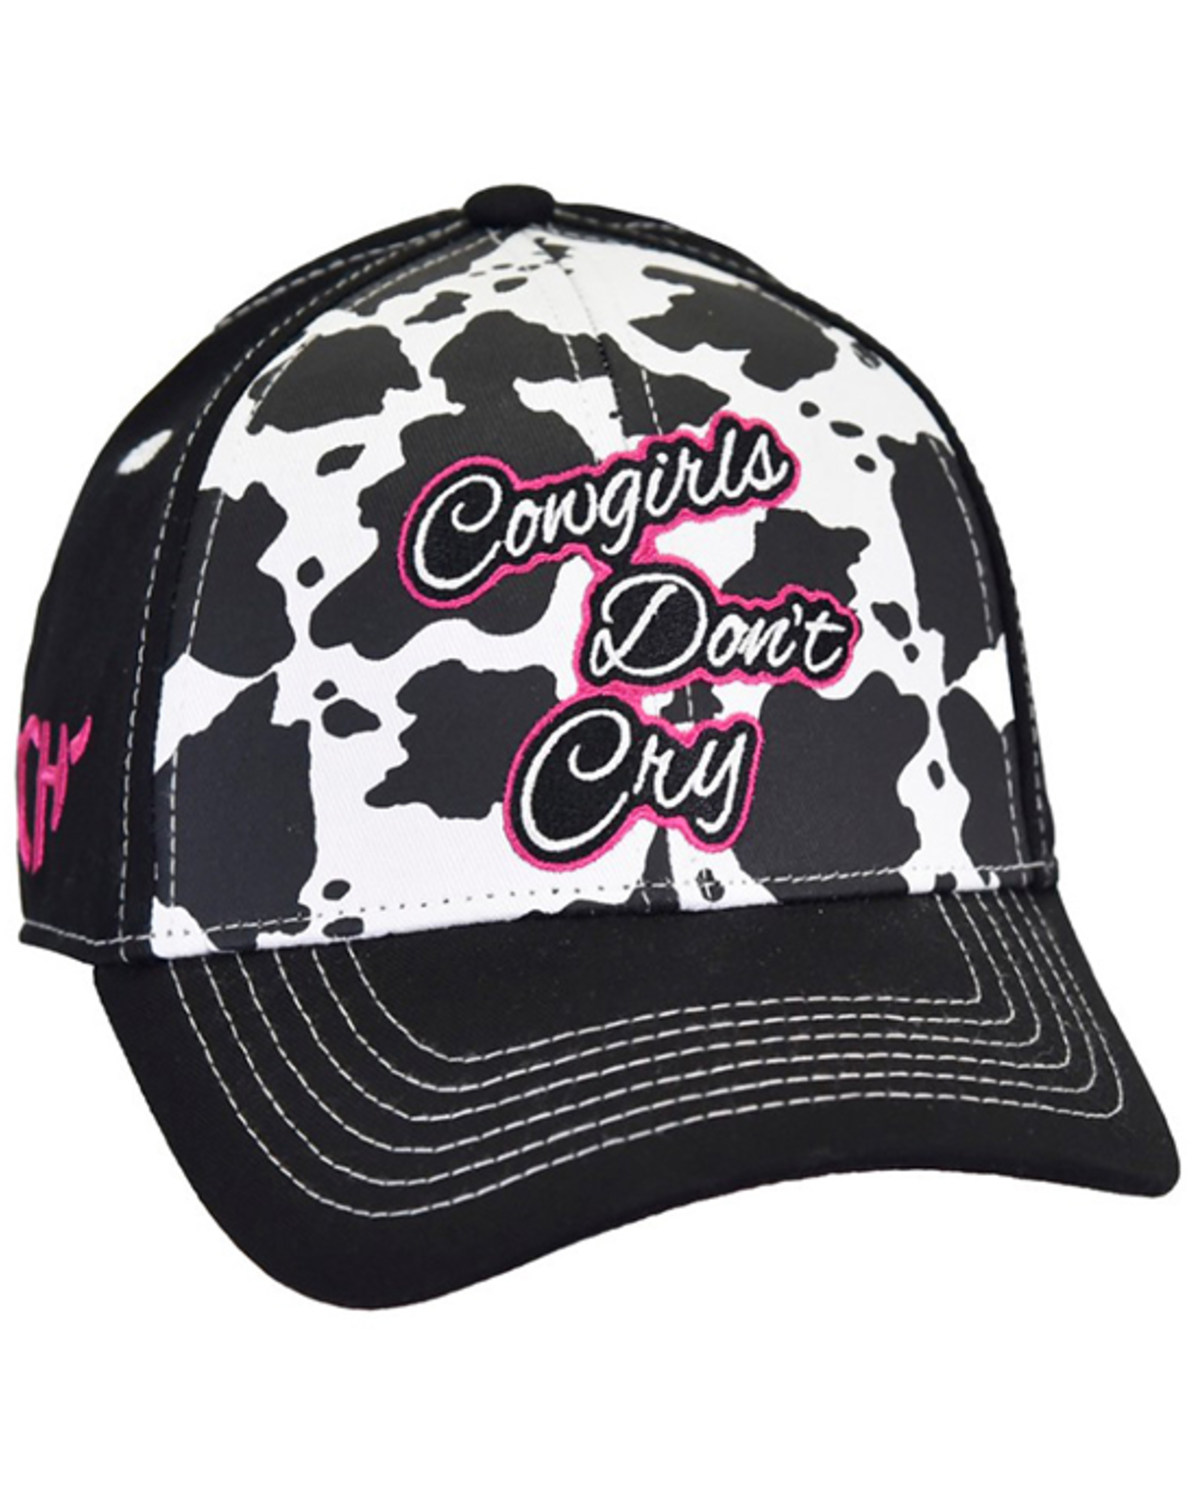 Cowgirl Hardware Girls' Cowgirls Don't Cry Baseball Cap